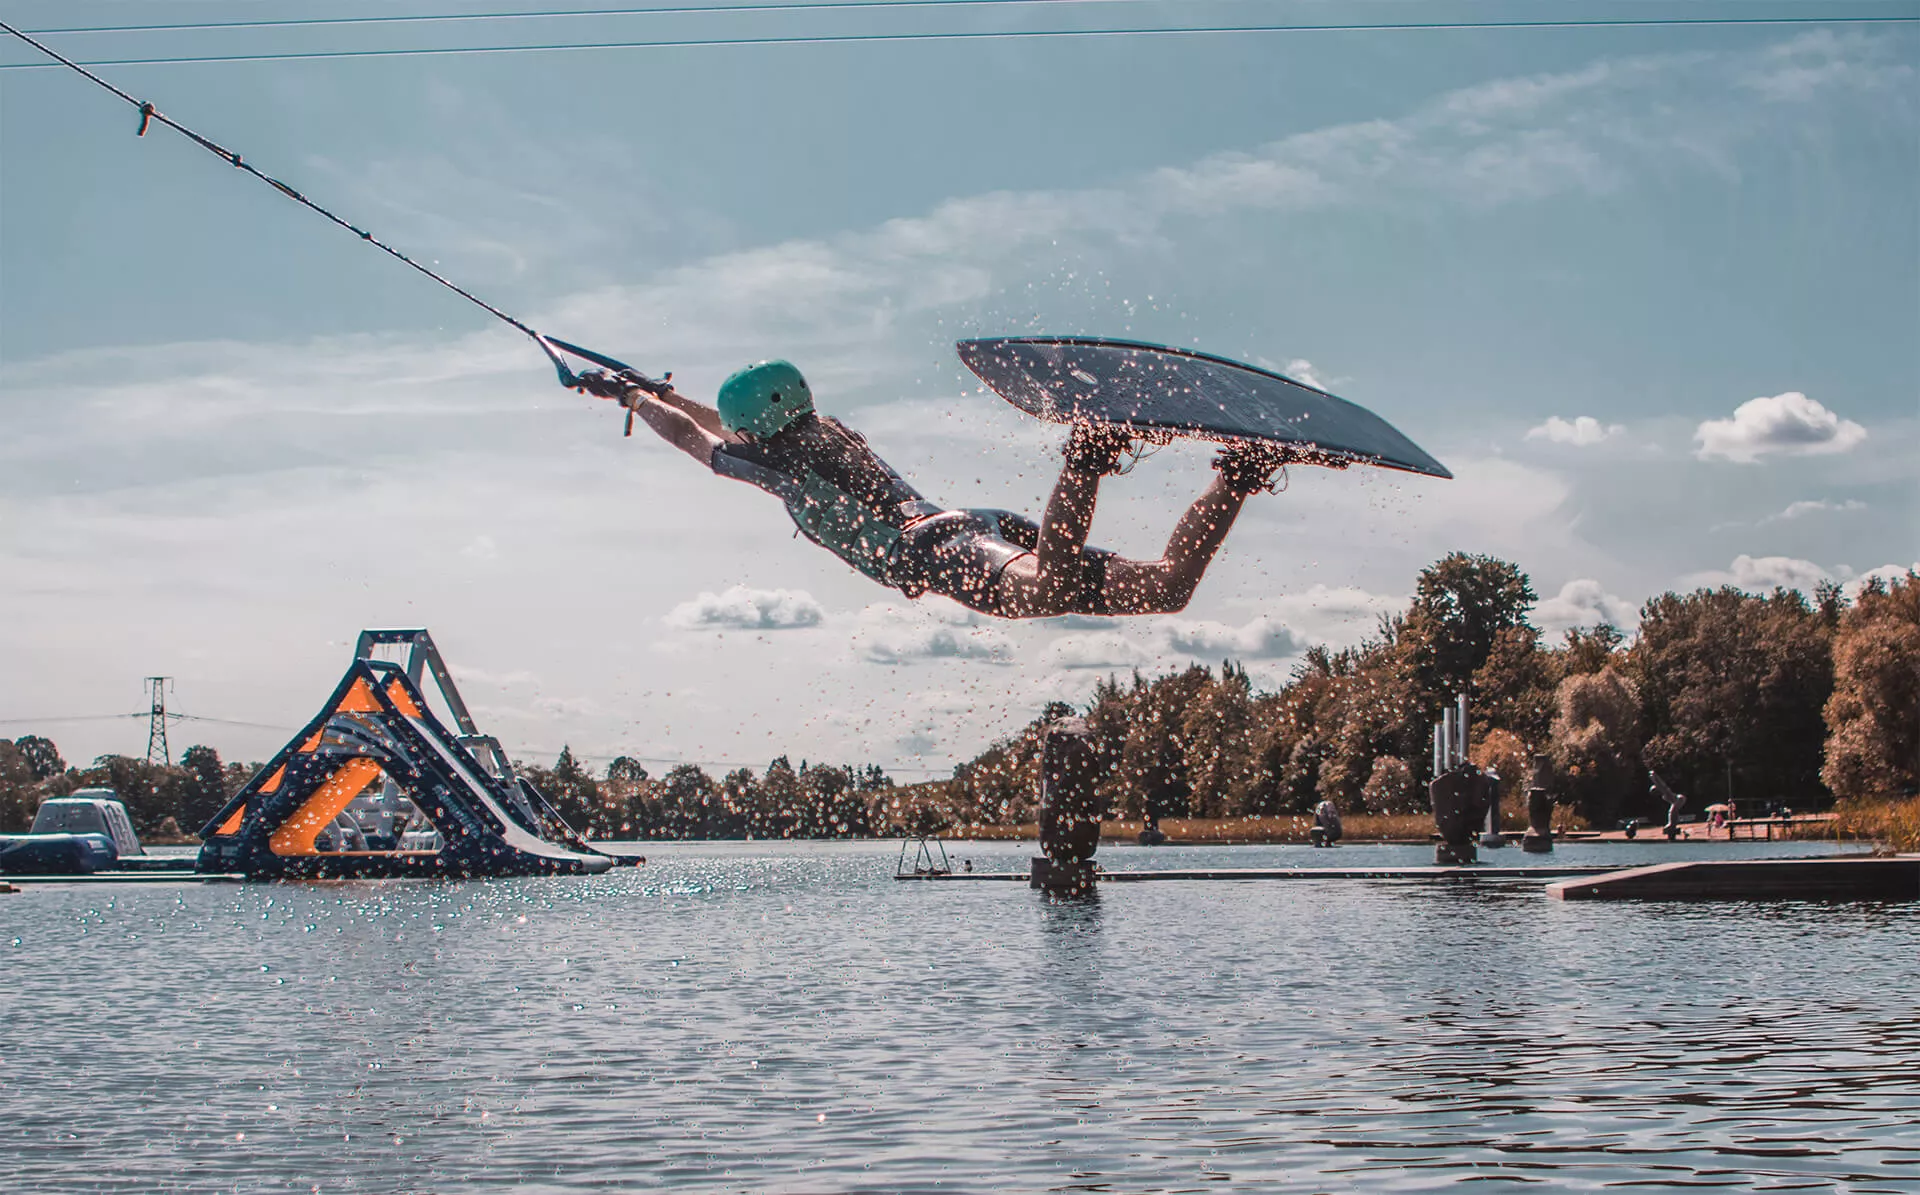 Splash Wake Park in Lithuania, Europe | Wakeboarding - Rated 4.5